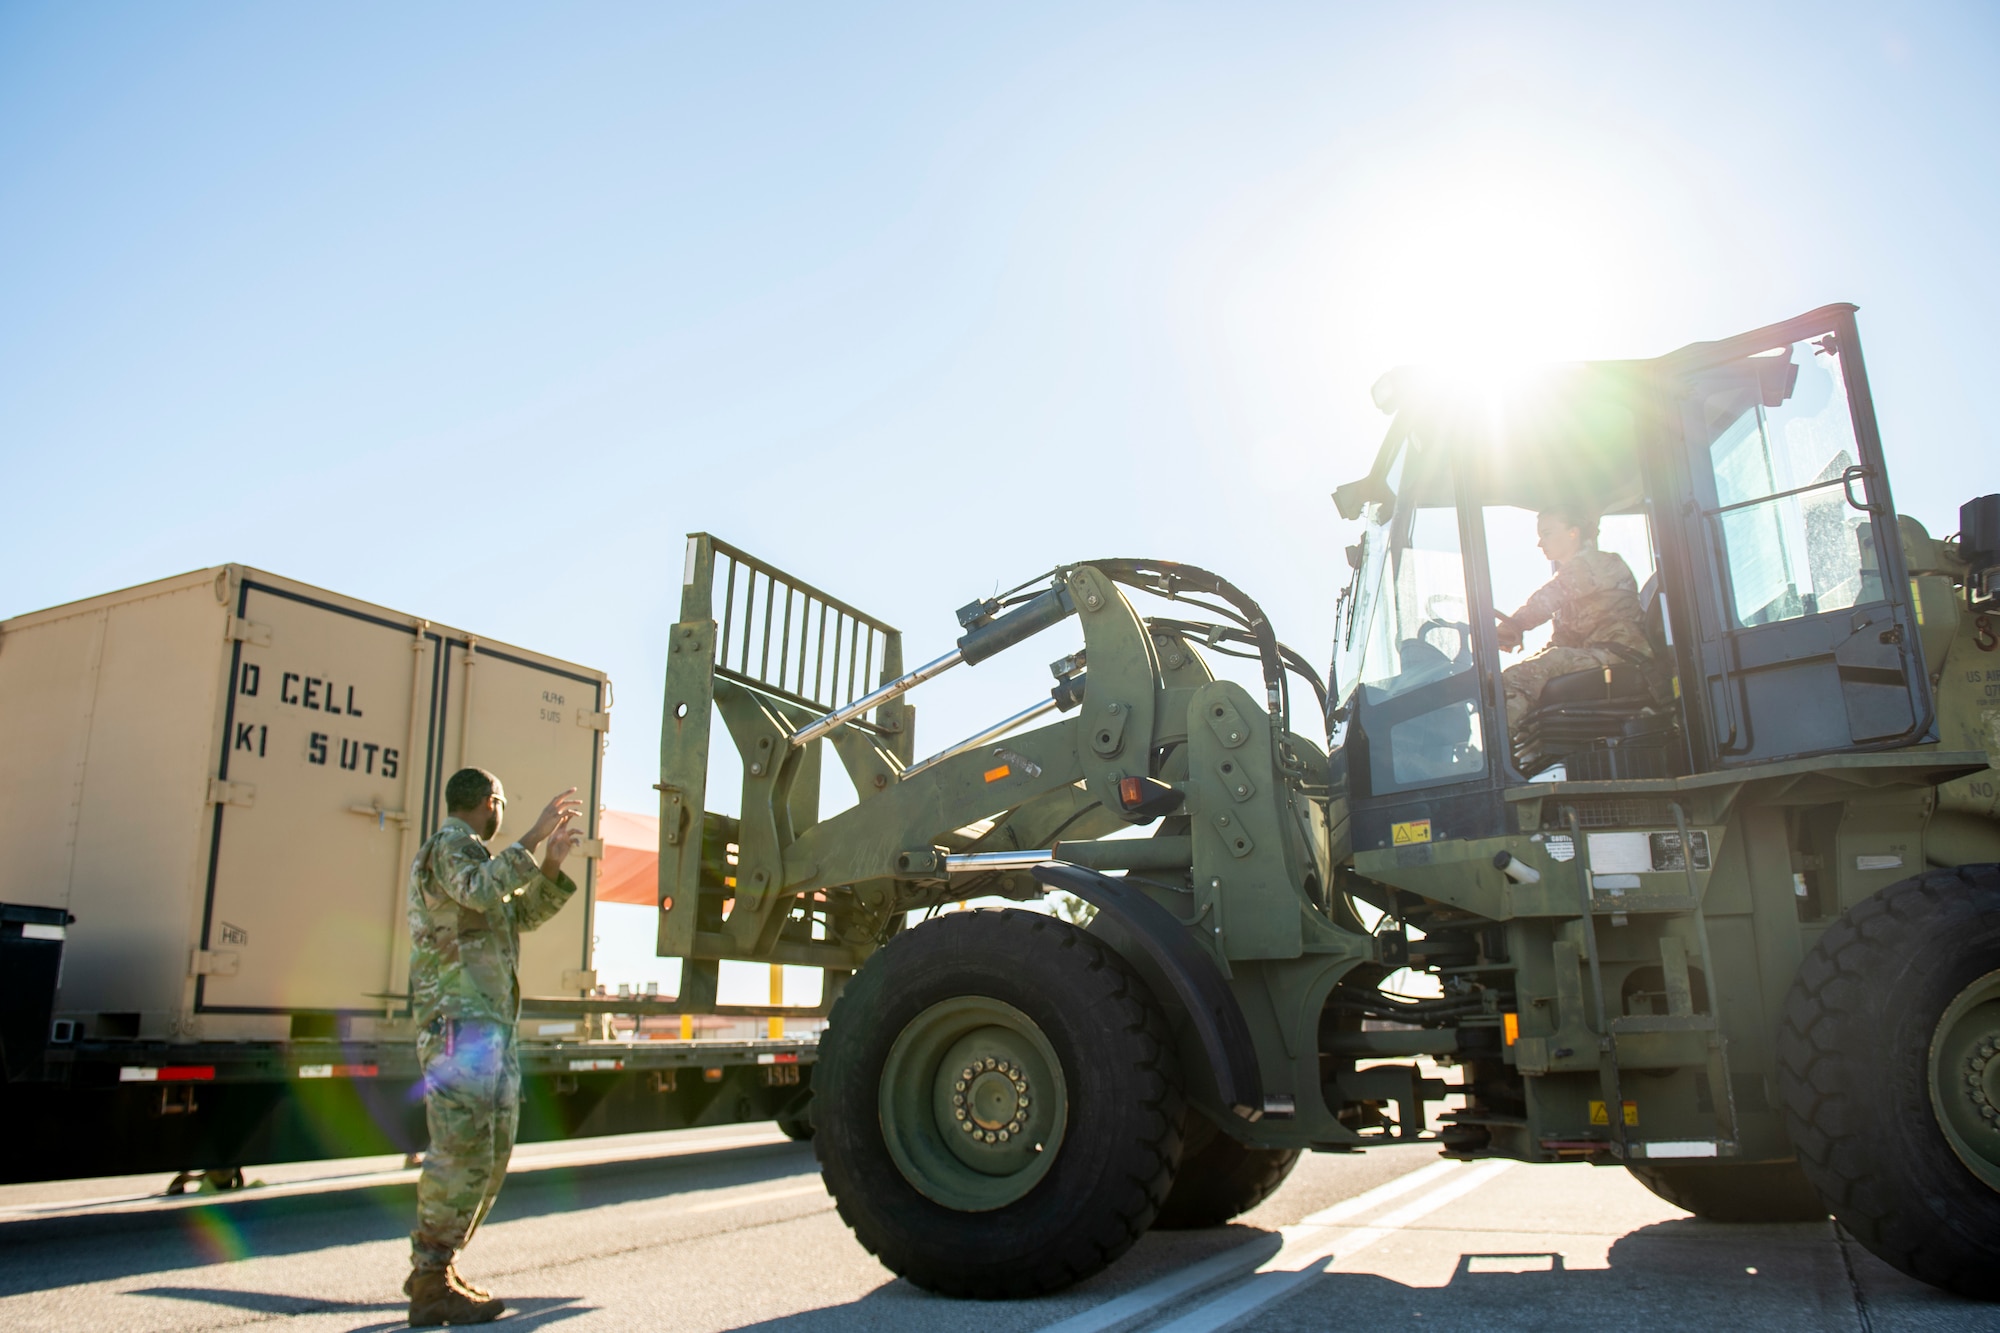 U.S. Air Force Tech. Sgt. Ismael Hayes, the noncommissioned officer in charge of Air Transportation for the 24th Special Operations Wing (SOW), Detachment 1, and Airman 1st Class Zoe Stough, a ground transportation support operator with the 6th Logistics Readiness Squadron, load cargo onto a semi-truck at MacDill Air Force Base, Florida, Feb. 1, 2022.